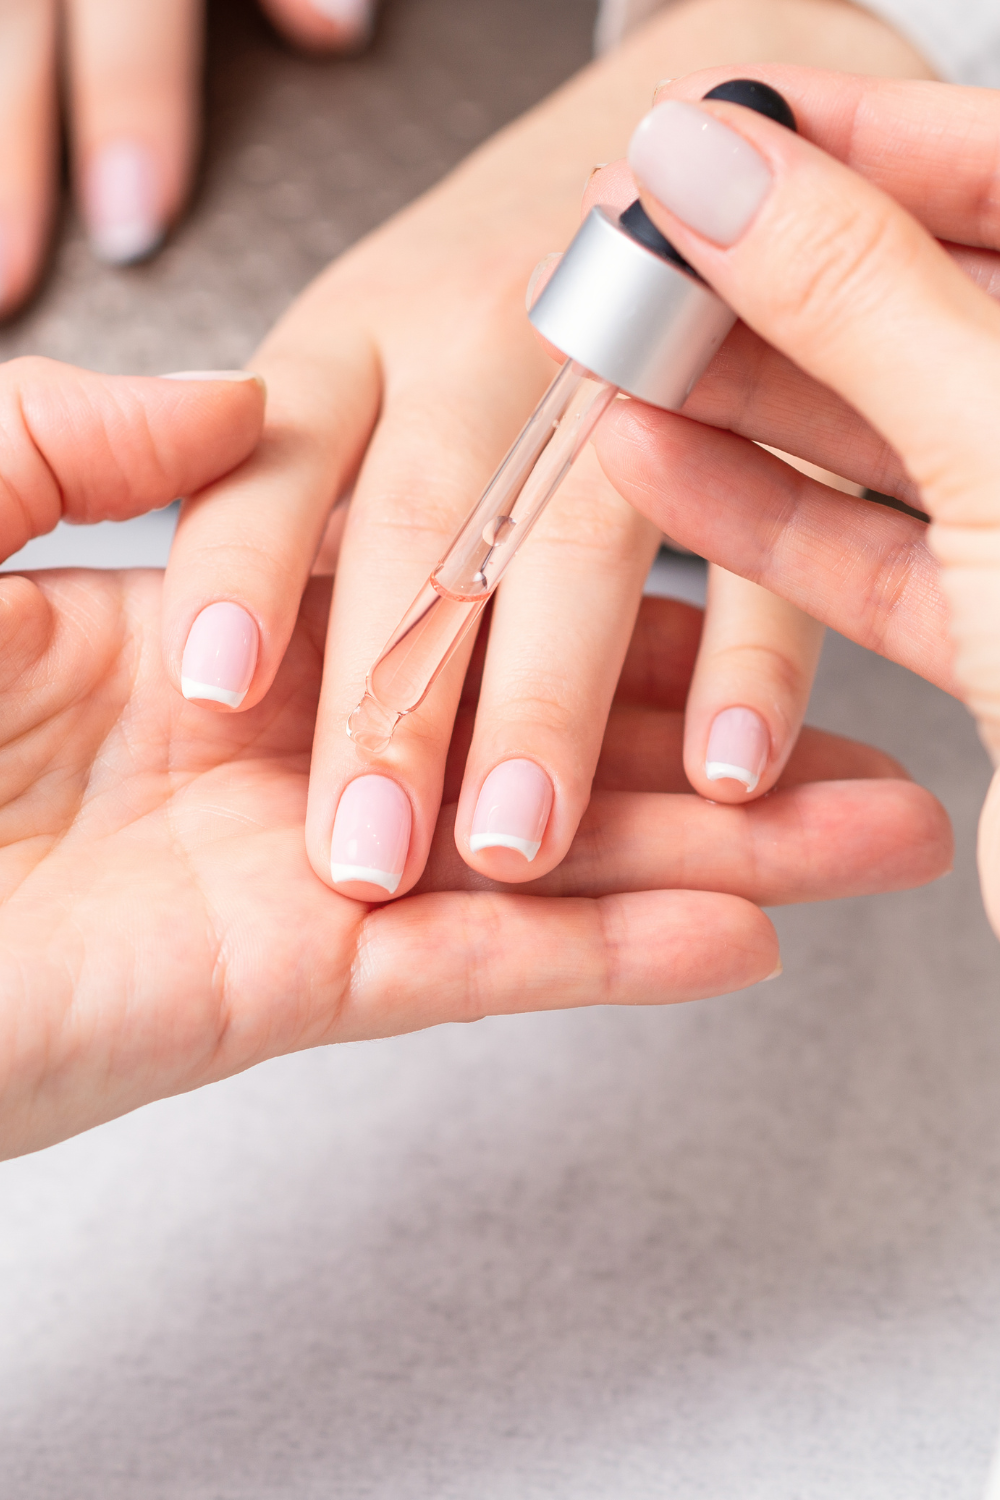 Woman applying cuticle oil as part of a hand care routine